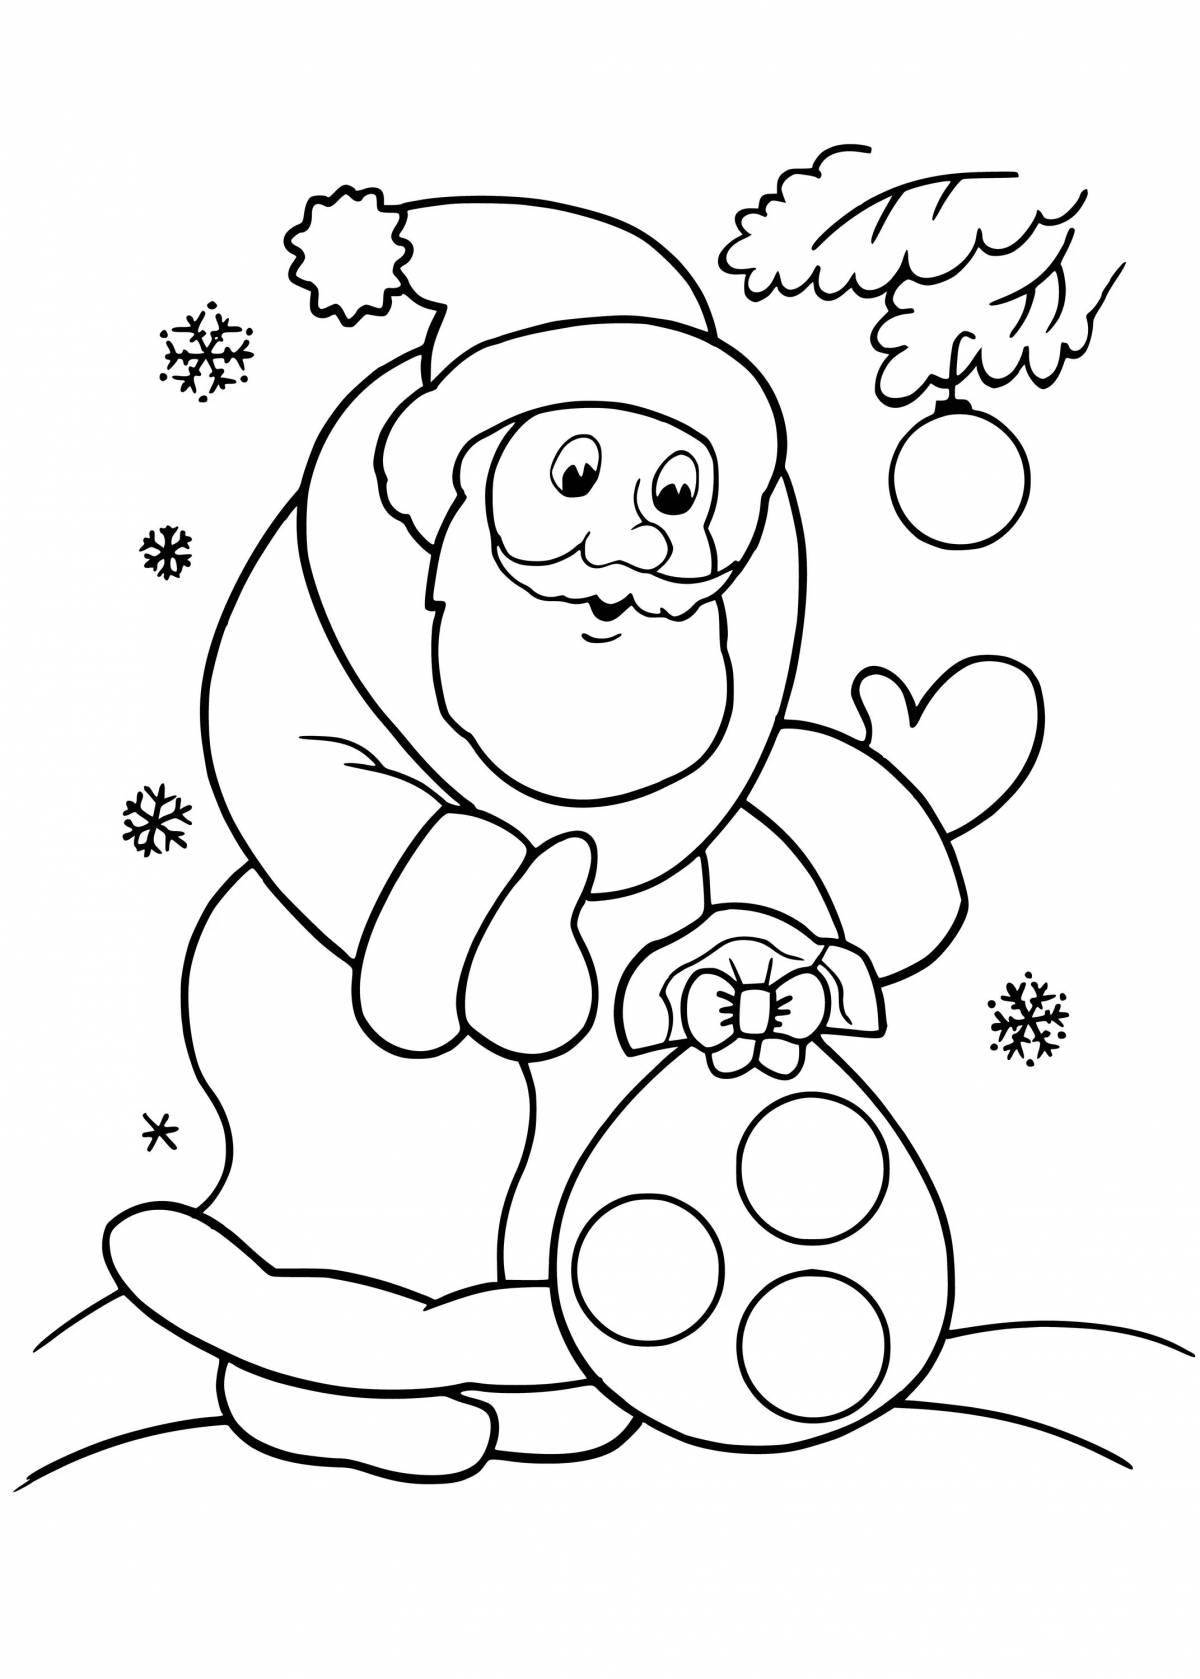 Spectacular Christmas coloring book for kids